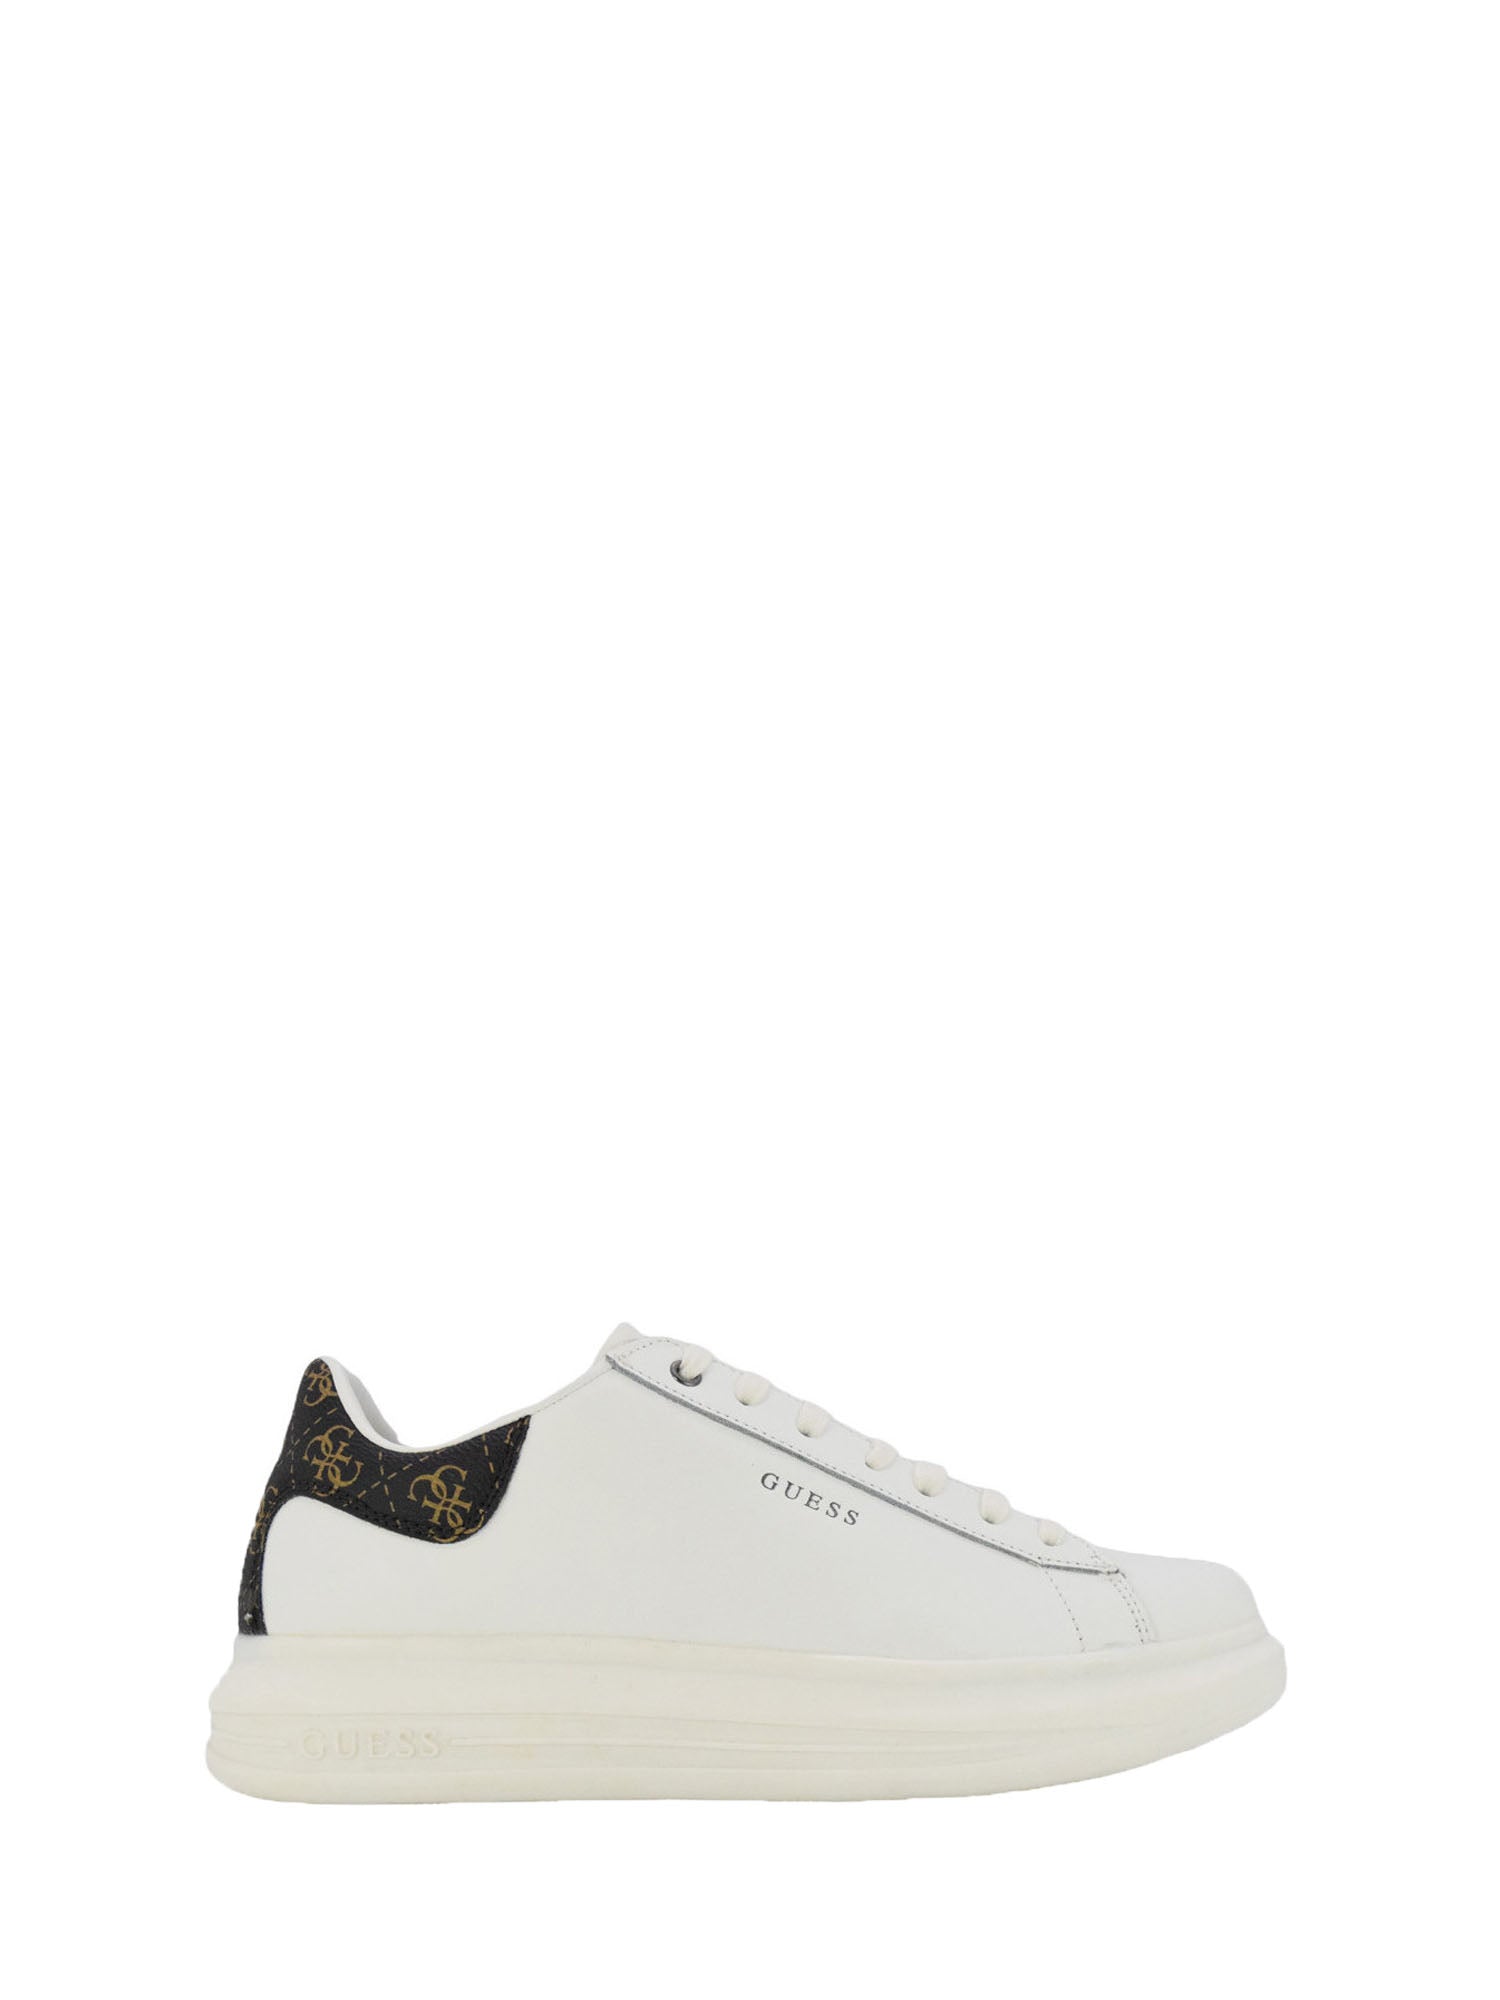 GUESS JEANS SHOES SNEAKERS SALERNO BIANCO - MARRONE